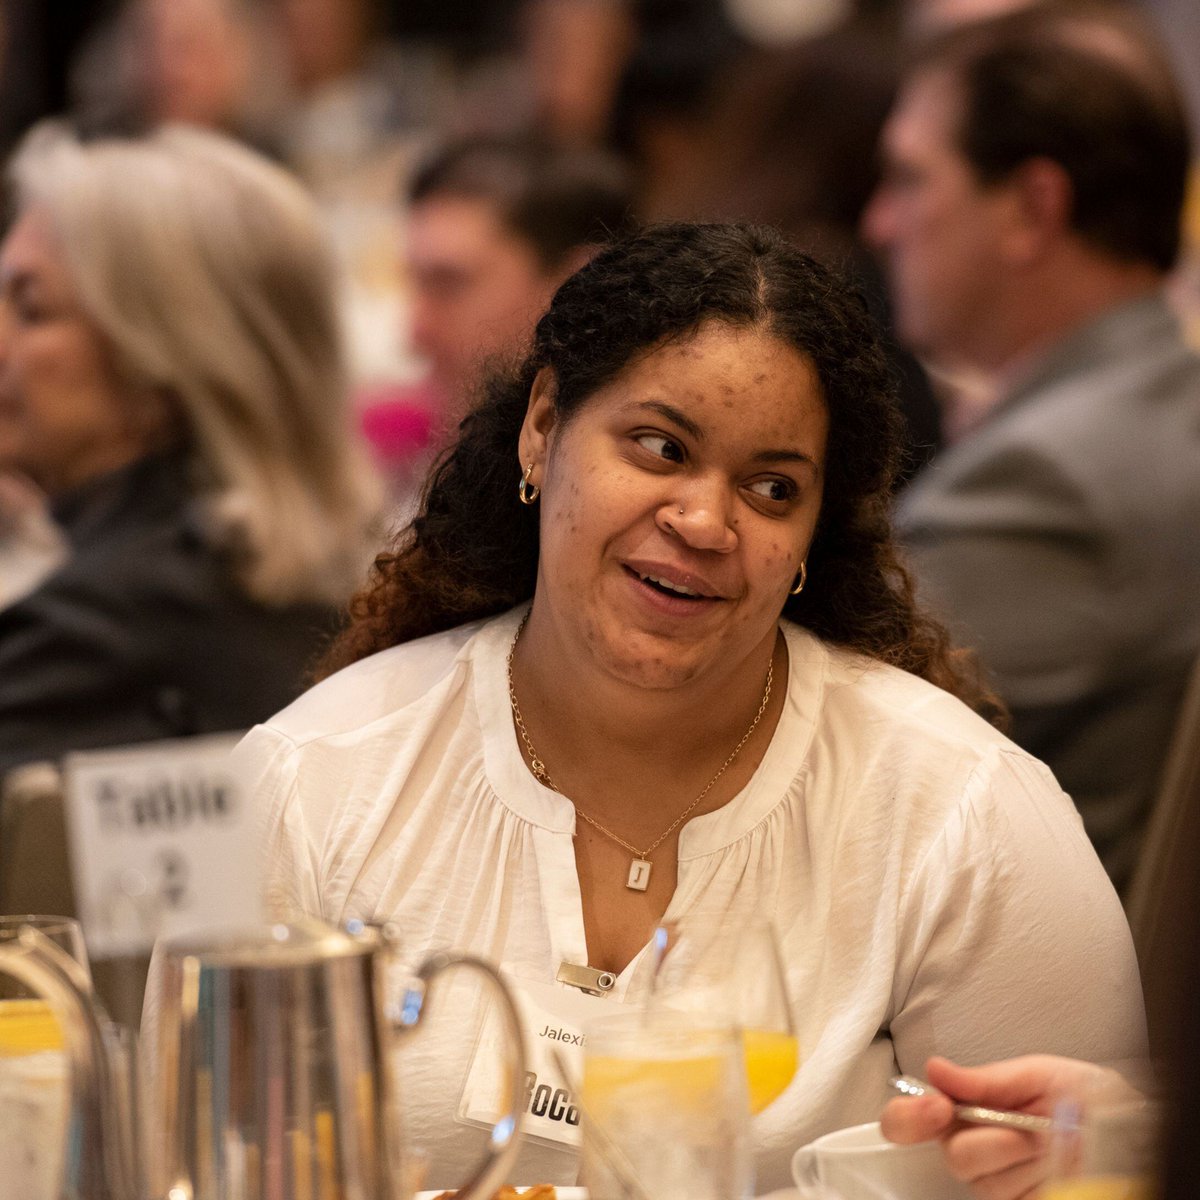 On Friday, hundreds of incredible partners and supporters gathered with us at Roca’s Annual Breakfast to celebrate young people taking steps away from violence and toward peace. Continue to support Roca and our mission here: hubs.la/Q02wpmsR0